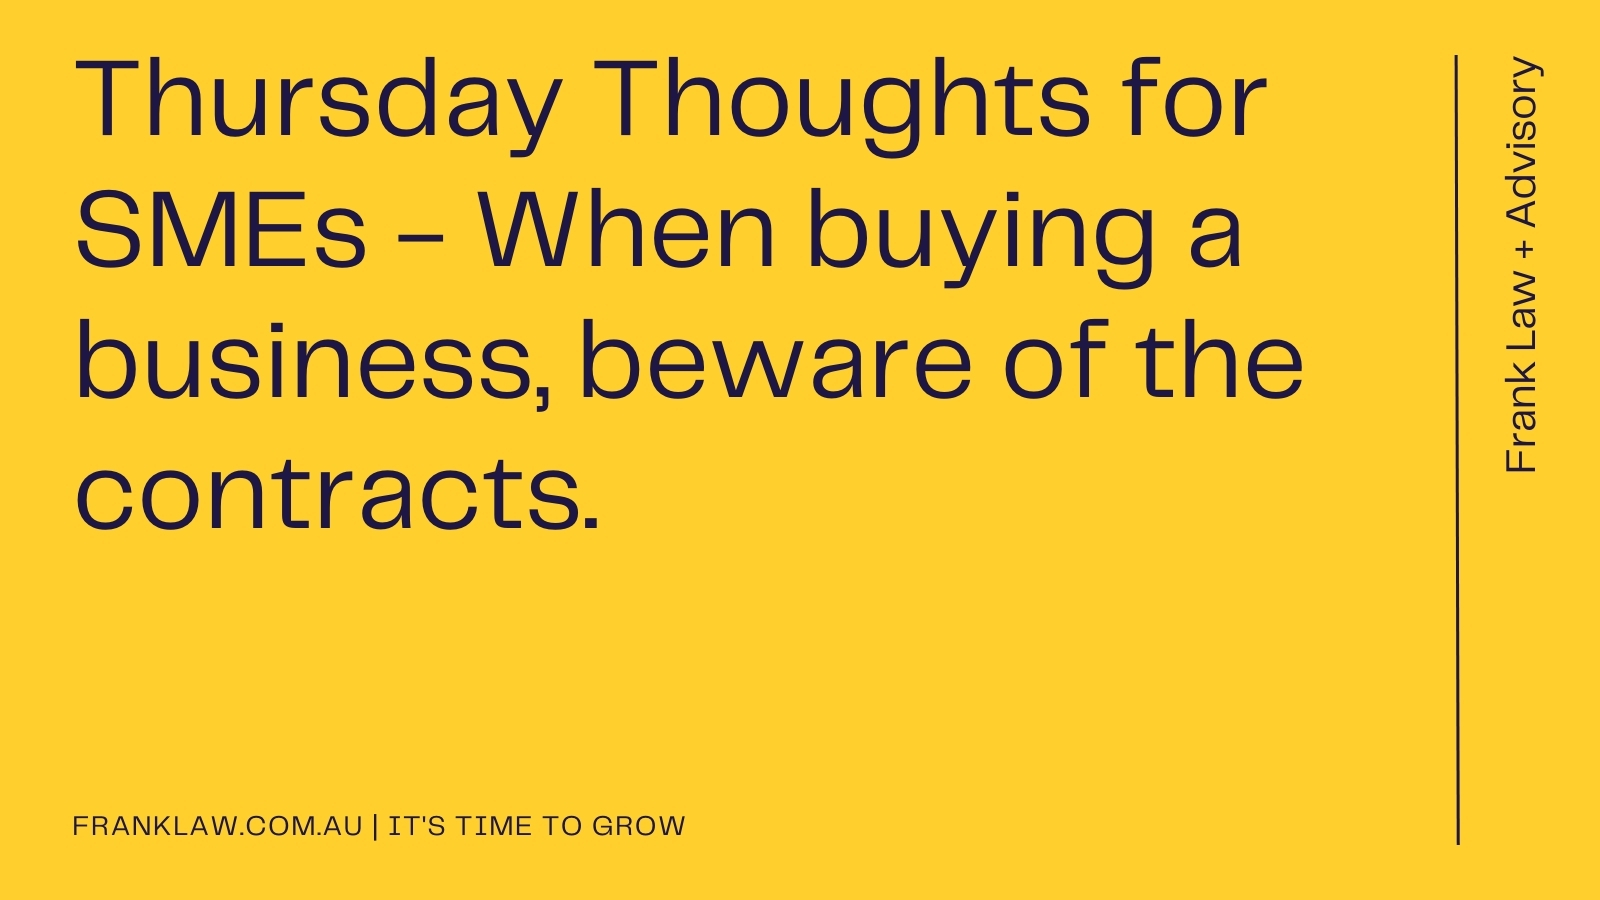 Thursday Thoughts for SMEs – When buying a business, beware of the contracts.